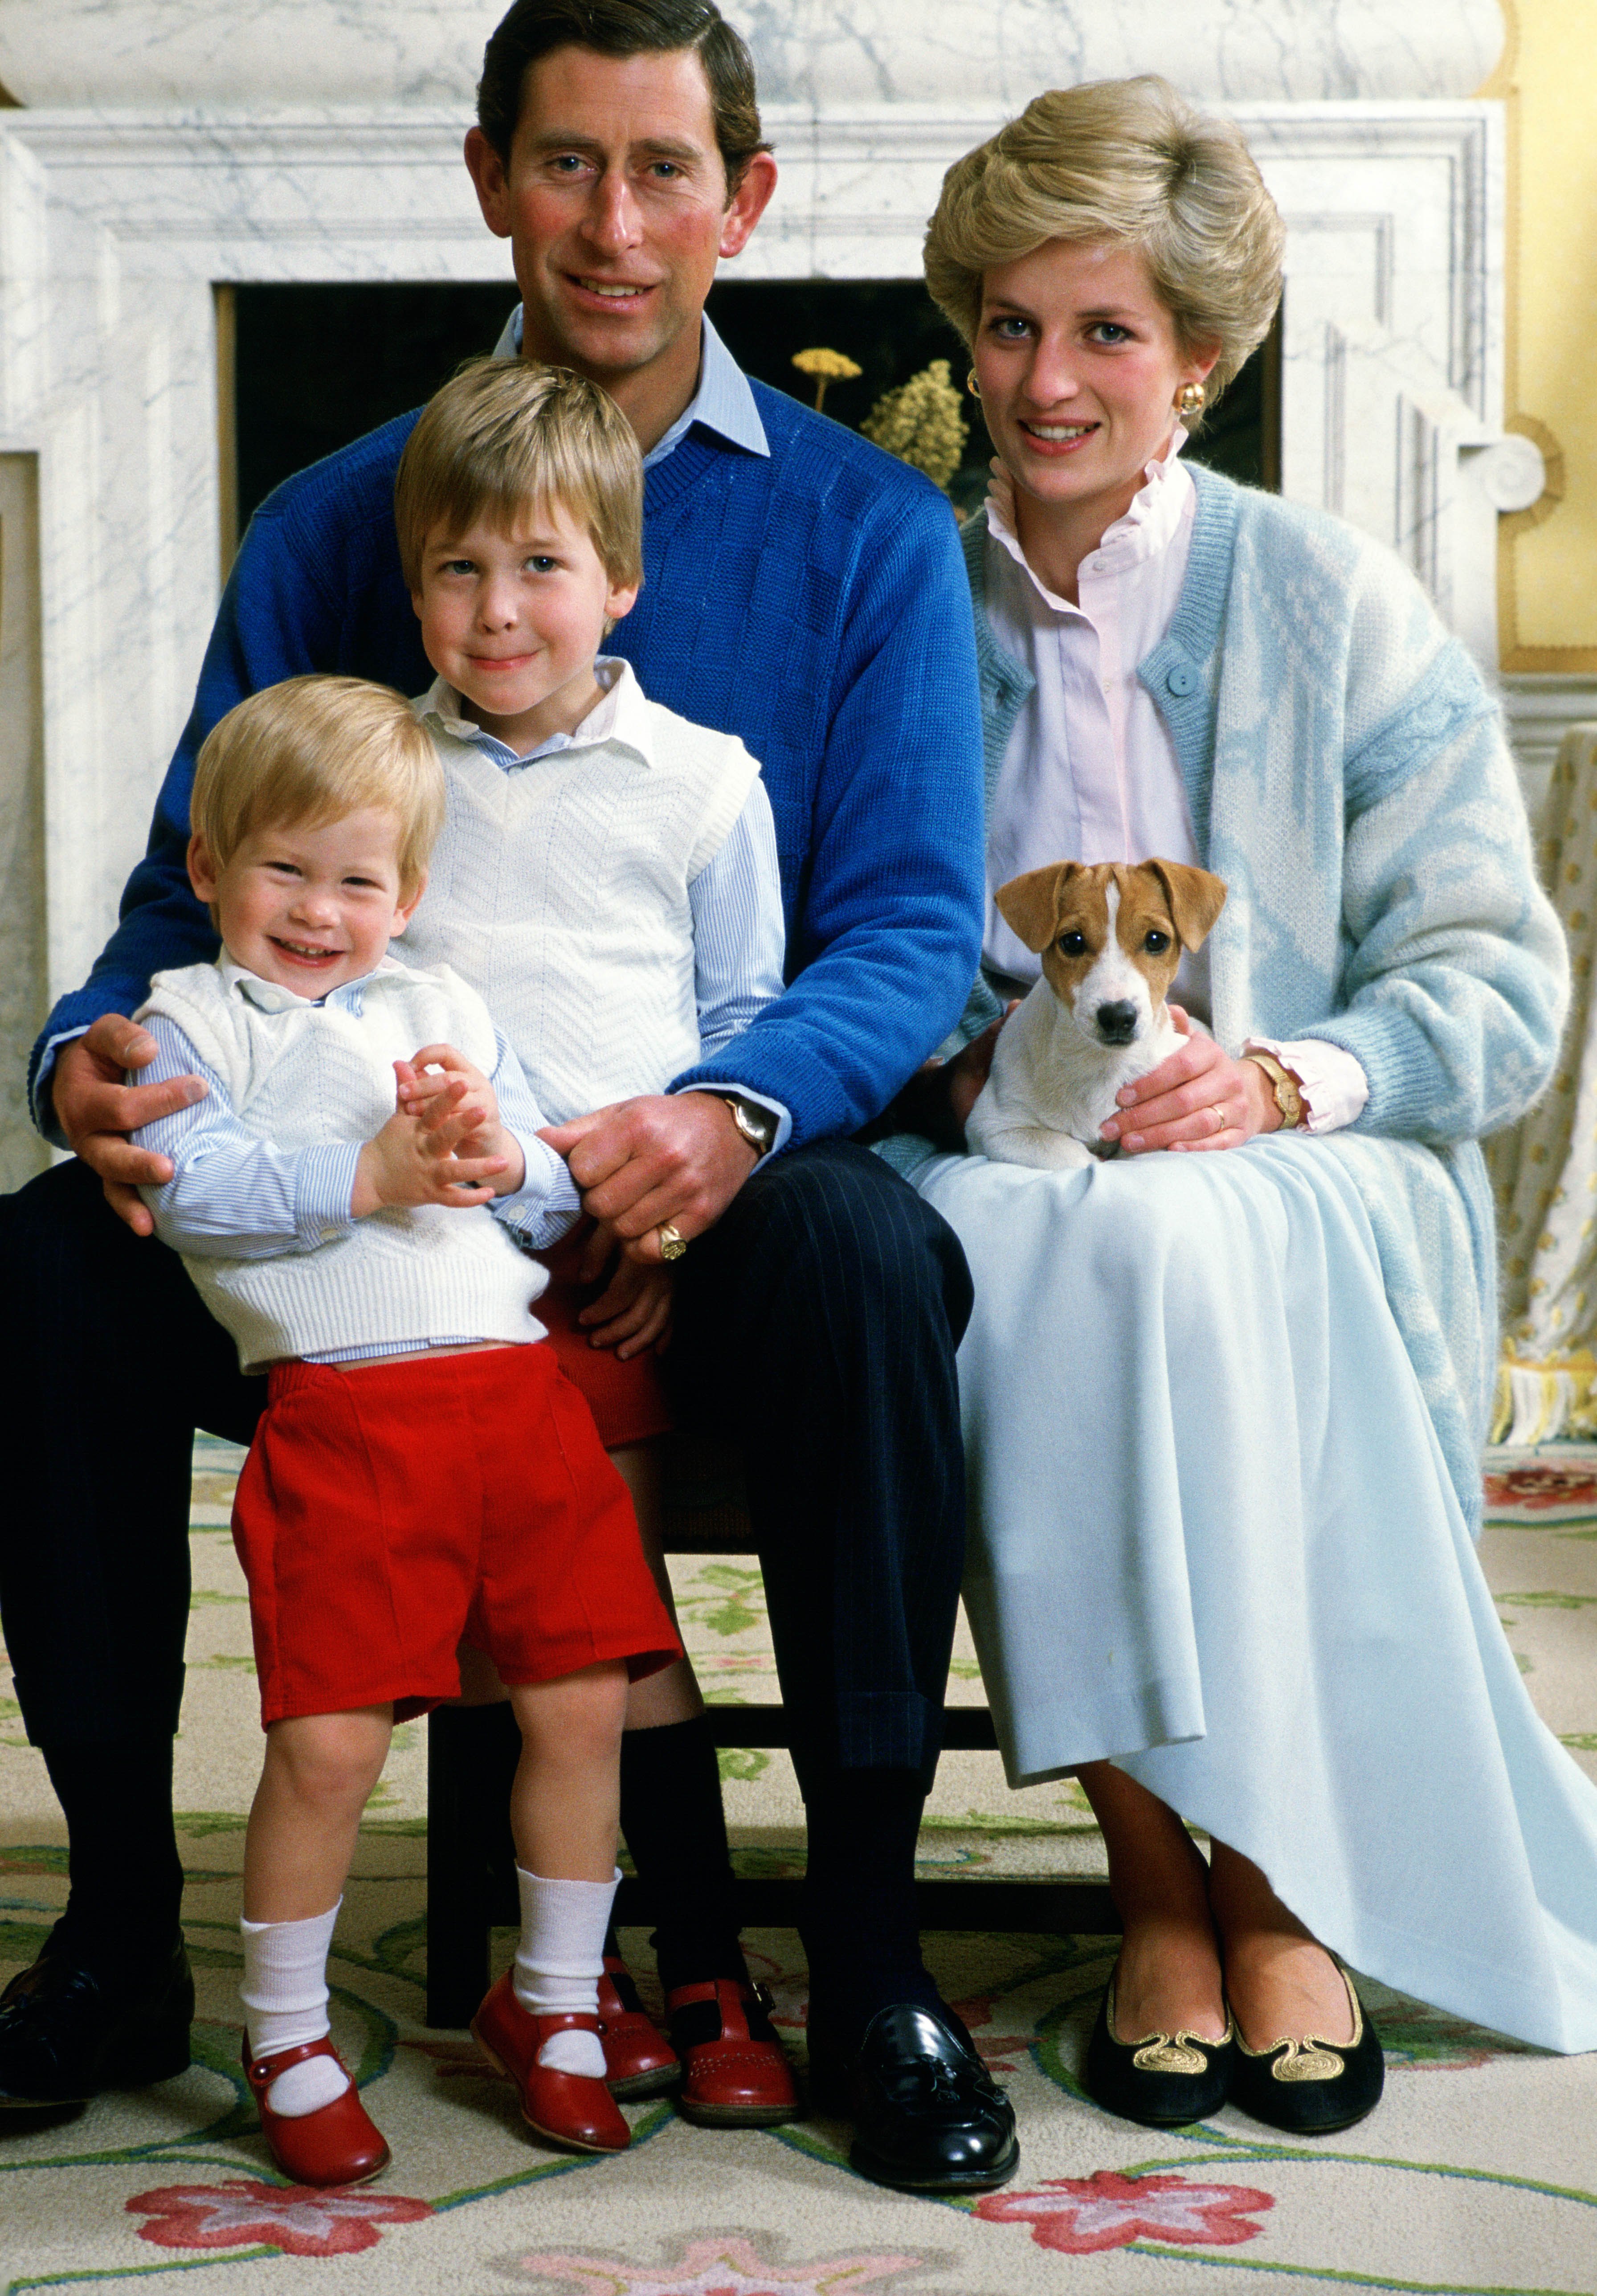 Prince Charles, Prince of Wales and Diana, Princess of Wales at the Kensington Palace with their sons Prince William and Prince Harry on December 01, 1986 | Source: Getty Images